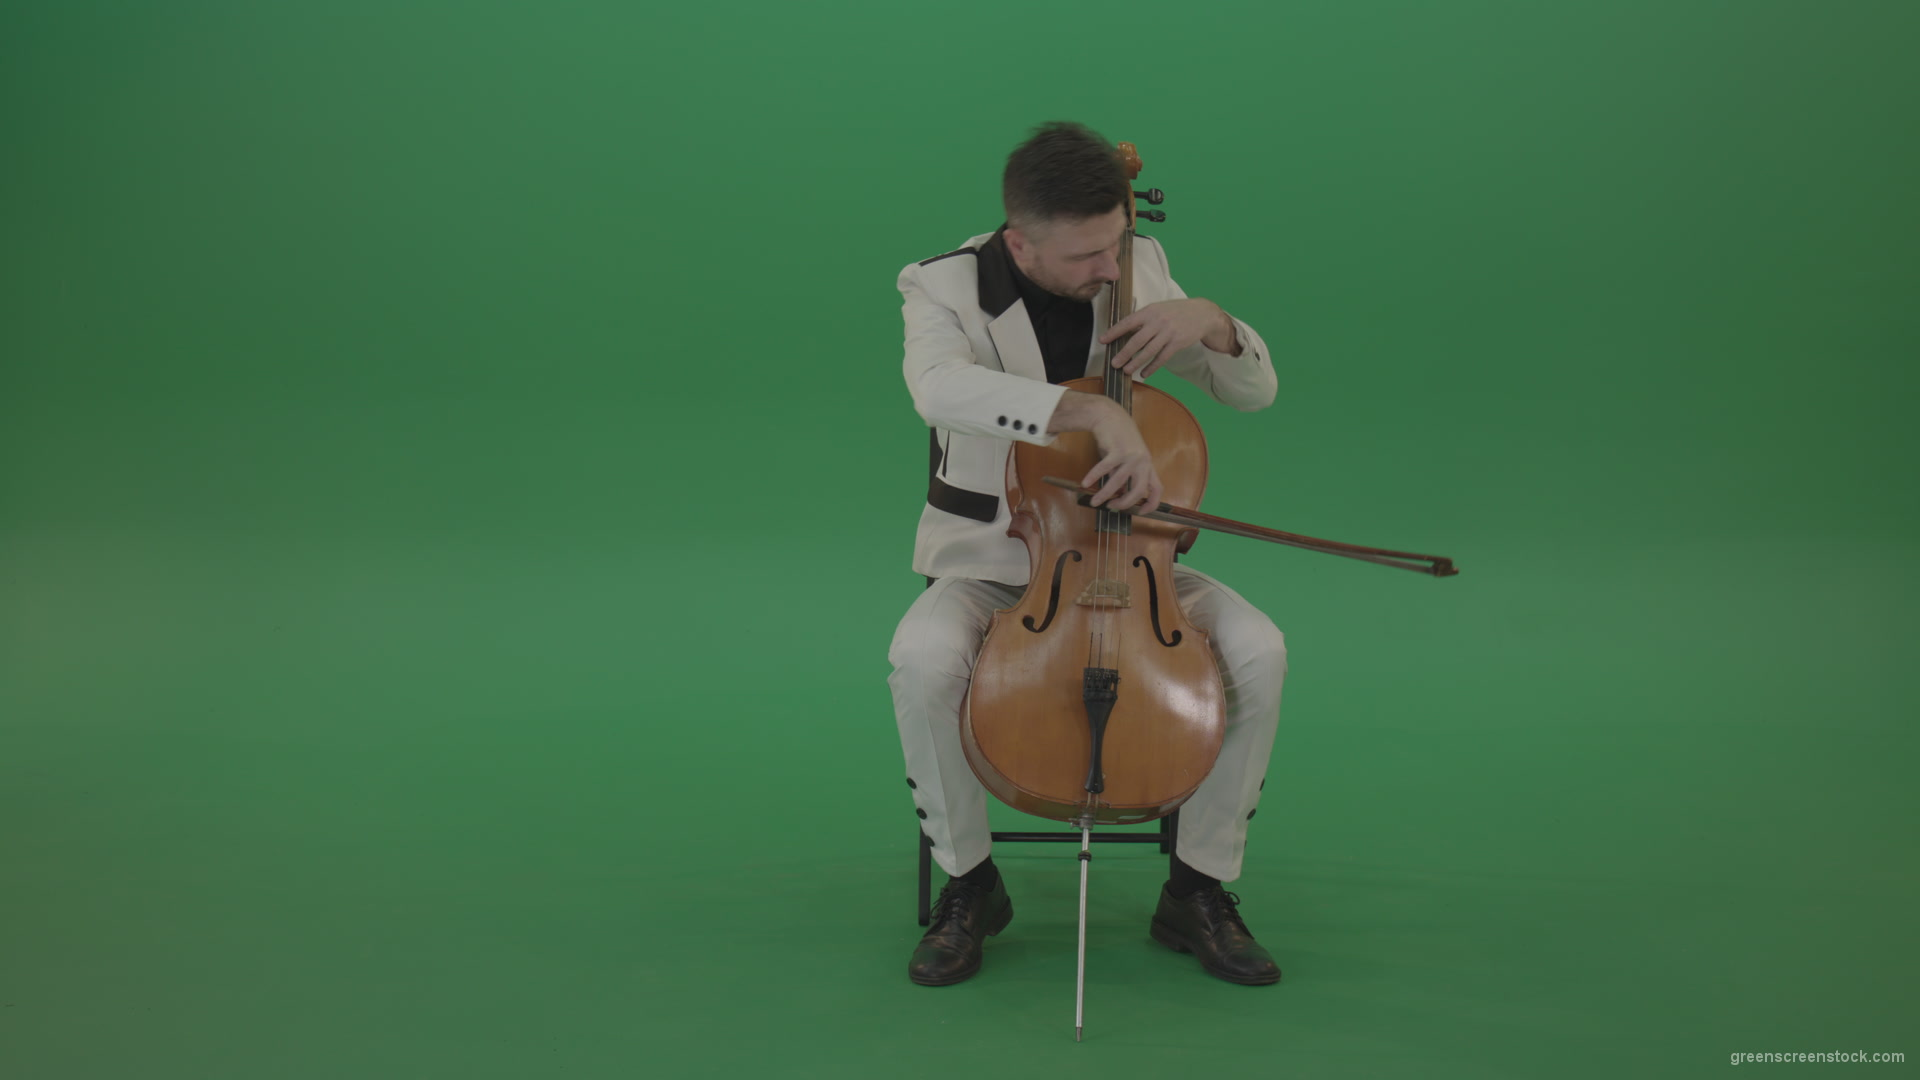 Classic-orchestra-man-in-white-wear-play-violoncello-cello-strings-music-instrument-isolated-on-green-screen_004 Green Screen Stock